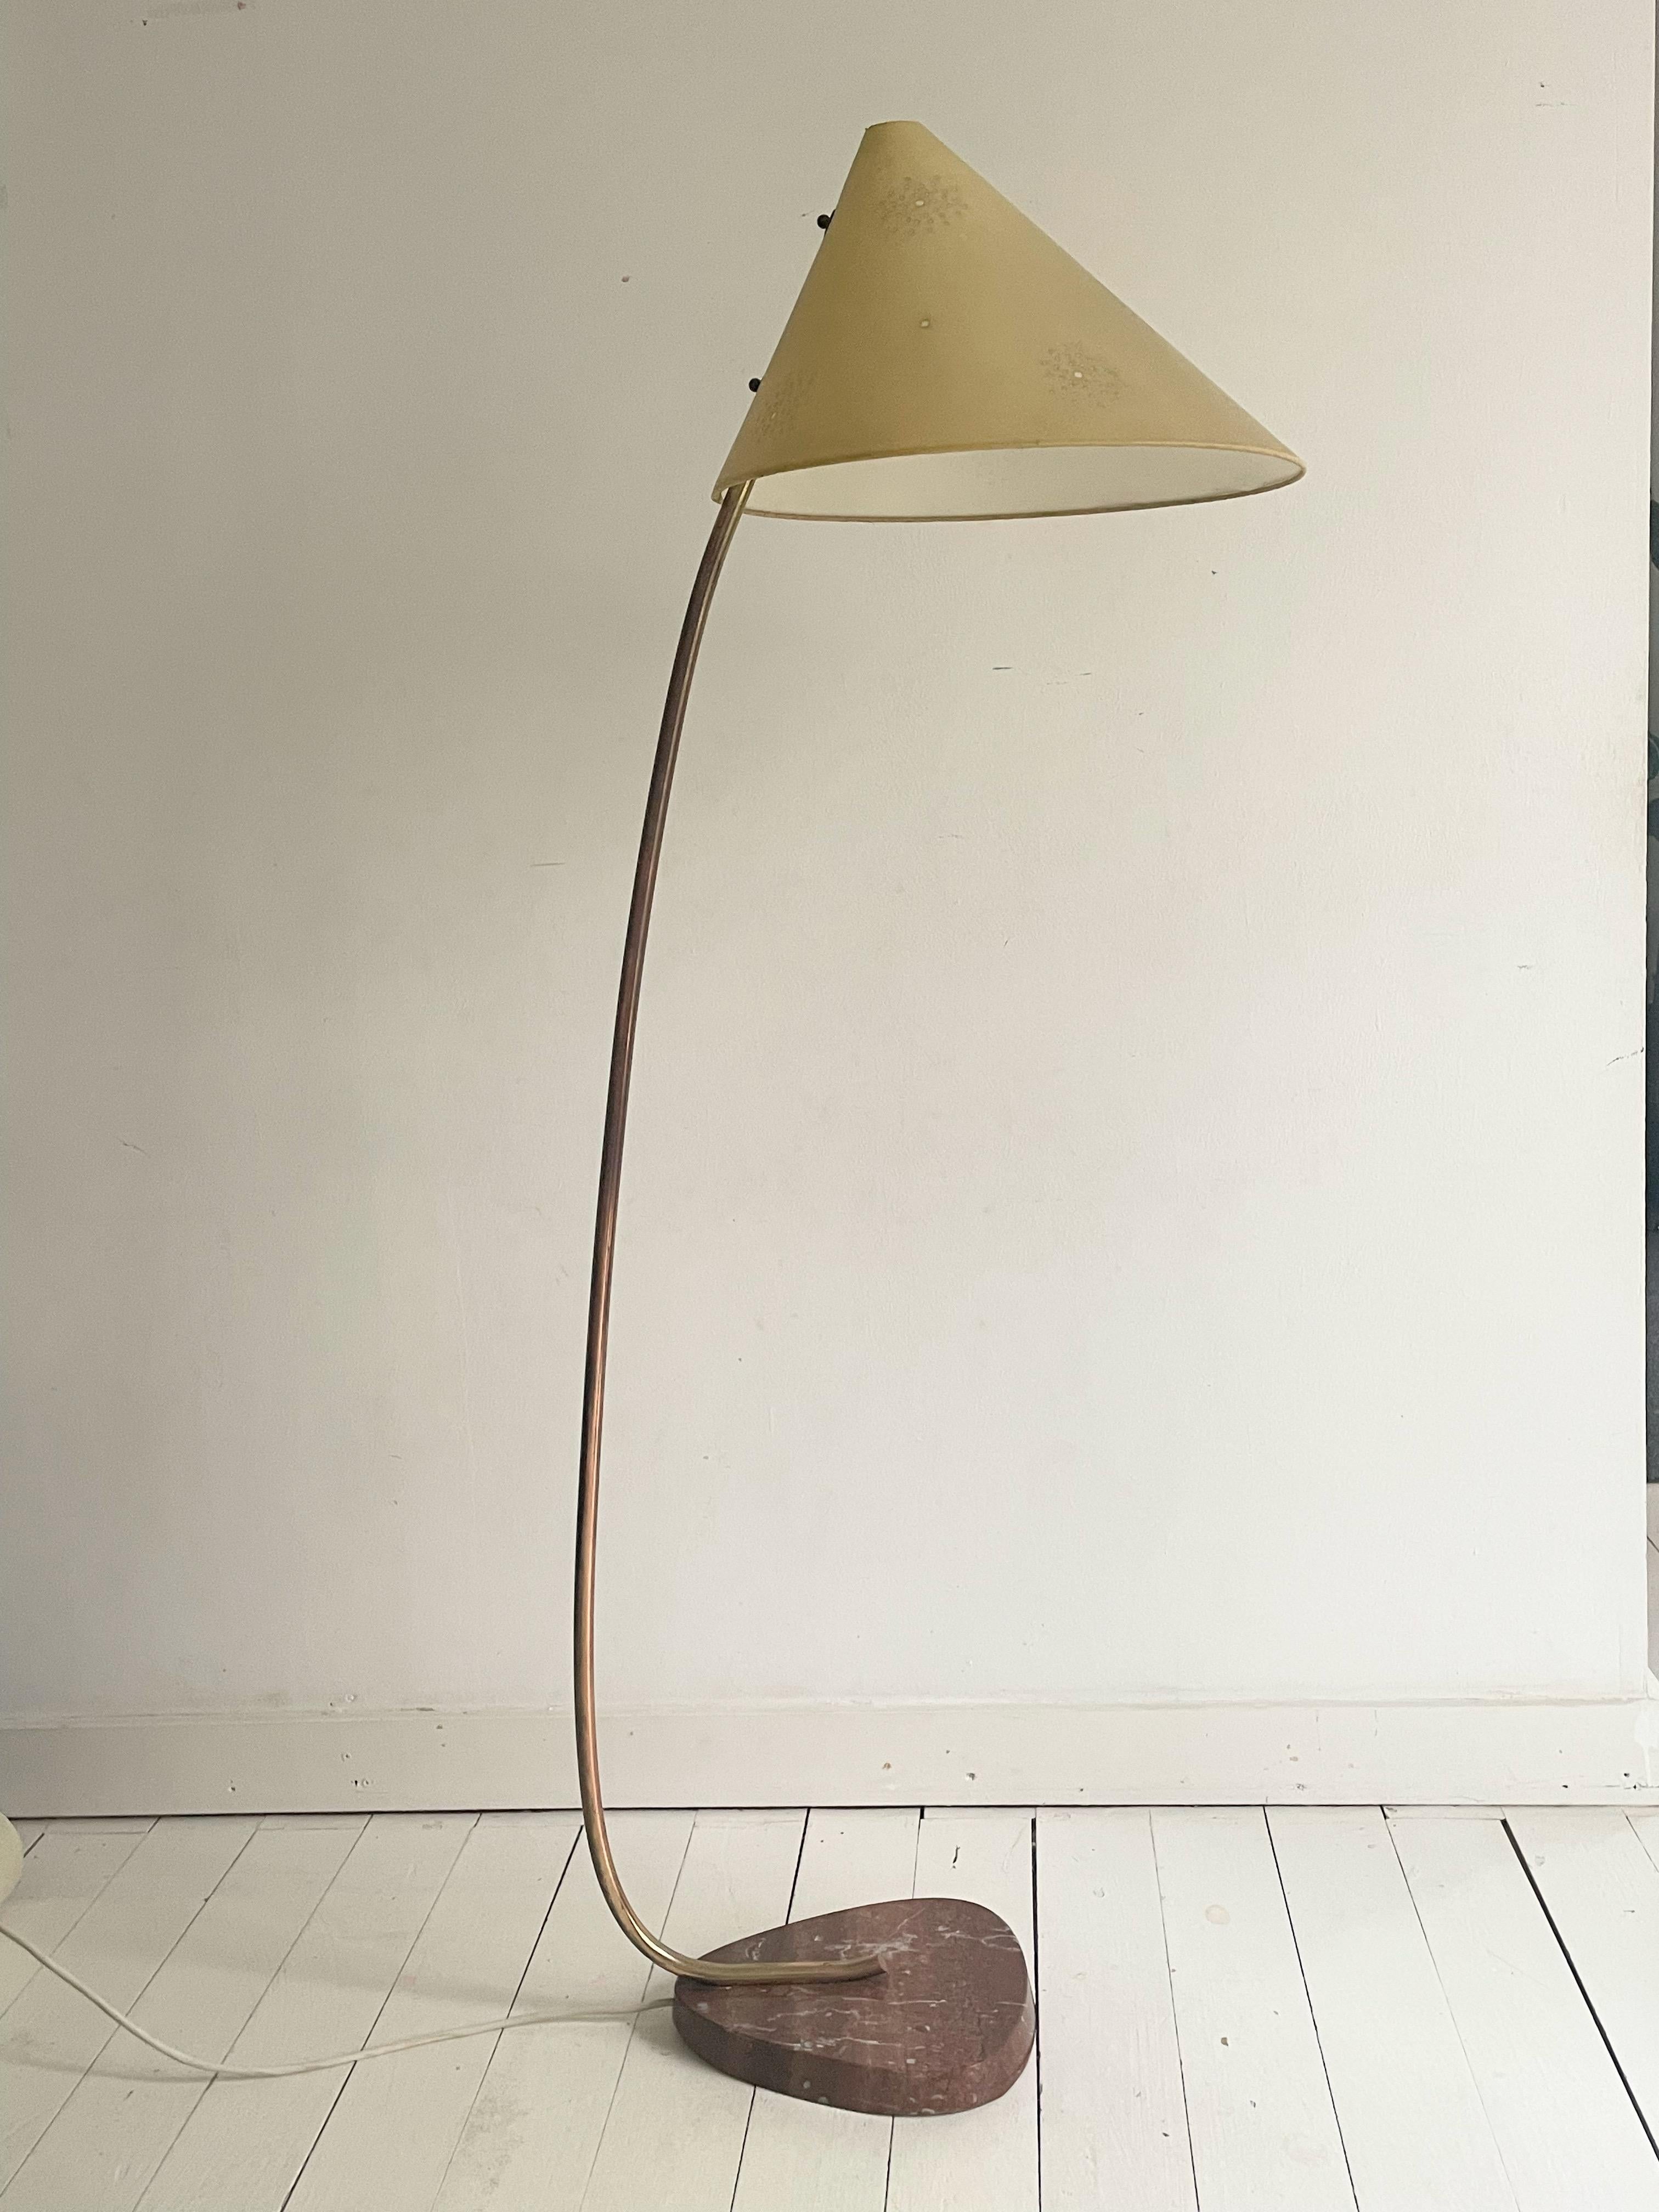 This unique type of lamp is a rare find, as it was manufactured in Austria in the 20th century. It was produced in very limited quantities in the middle of the century. Mounted on a marble base with a bent brass stem and a perforated conical shade.